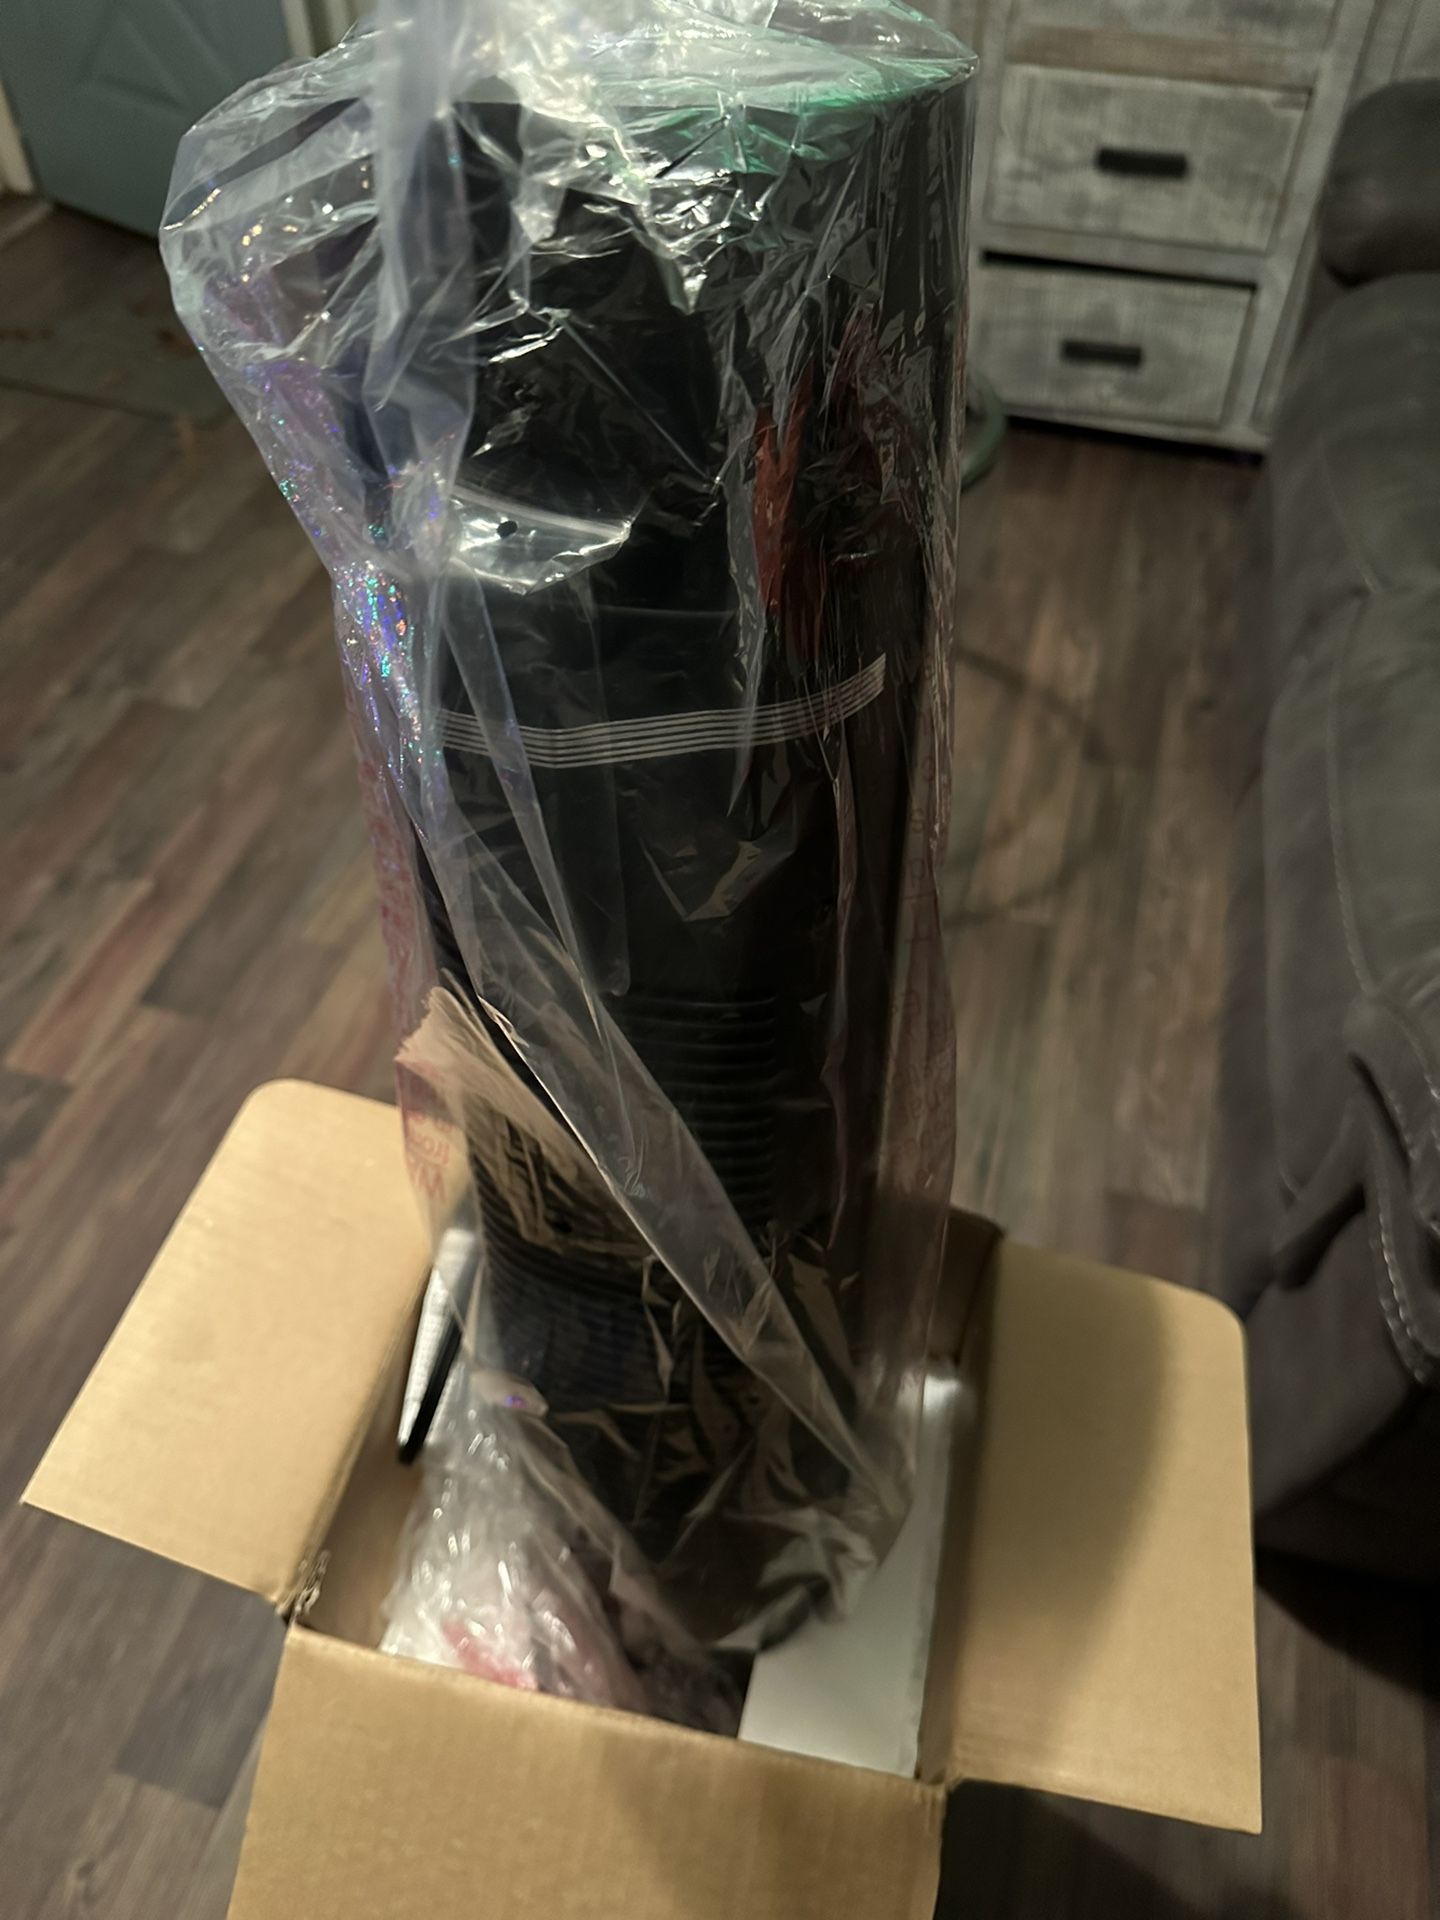 Brand new in the box taoreonics  oscillation tower space heater ! 